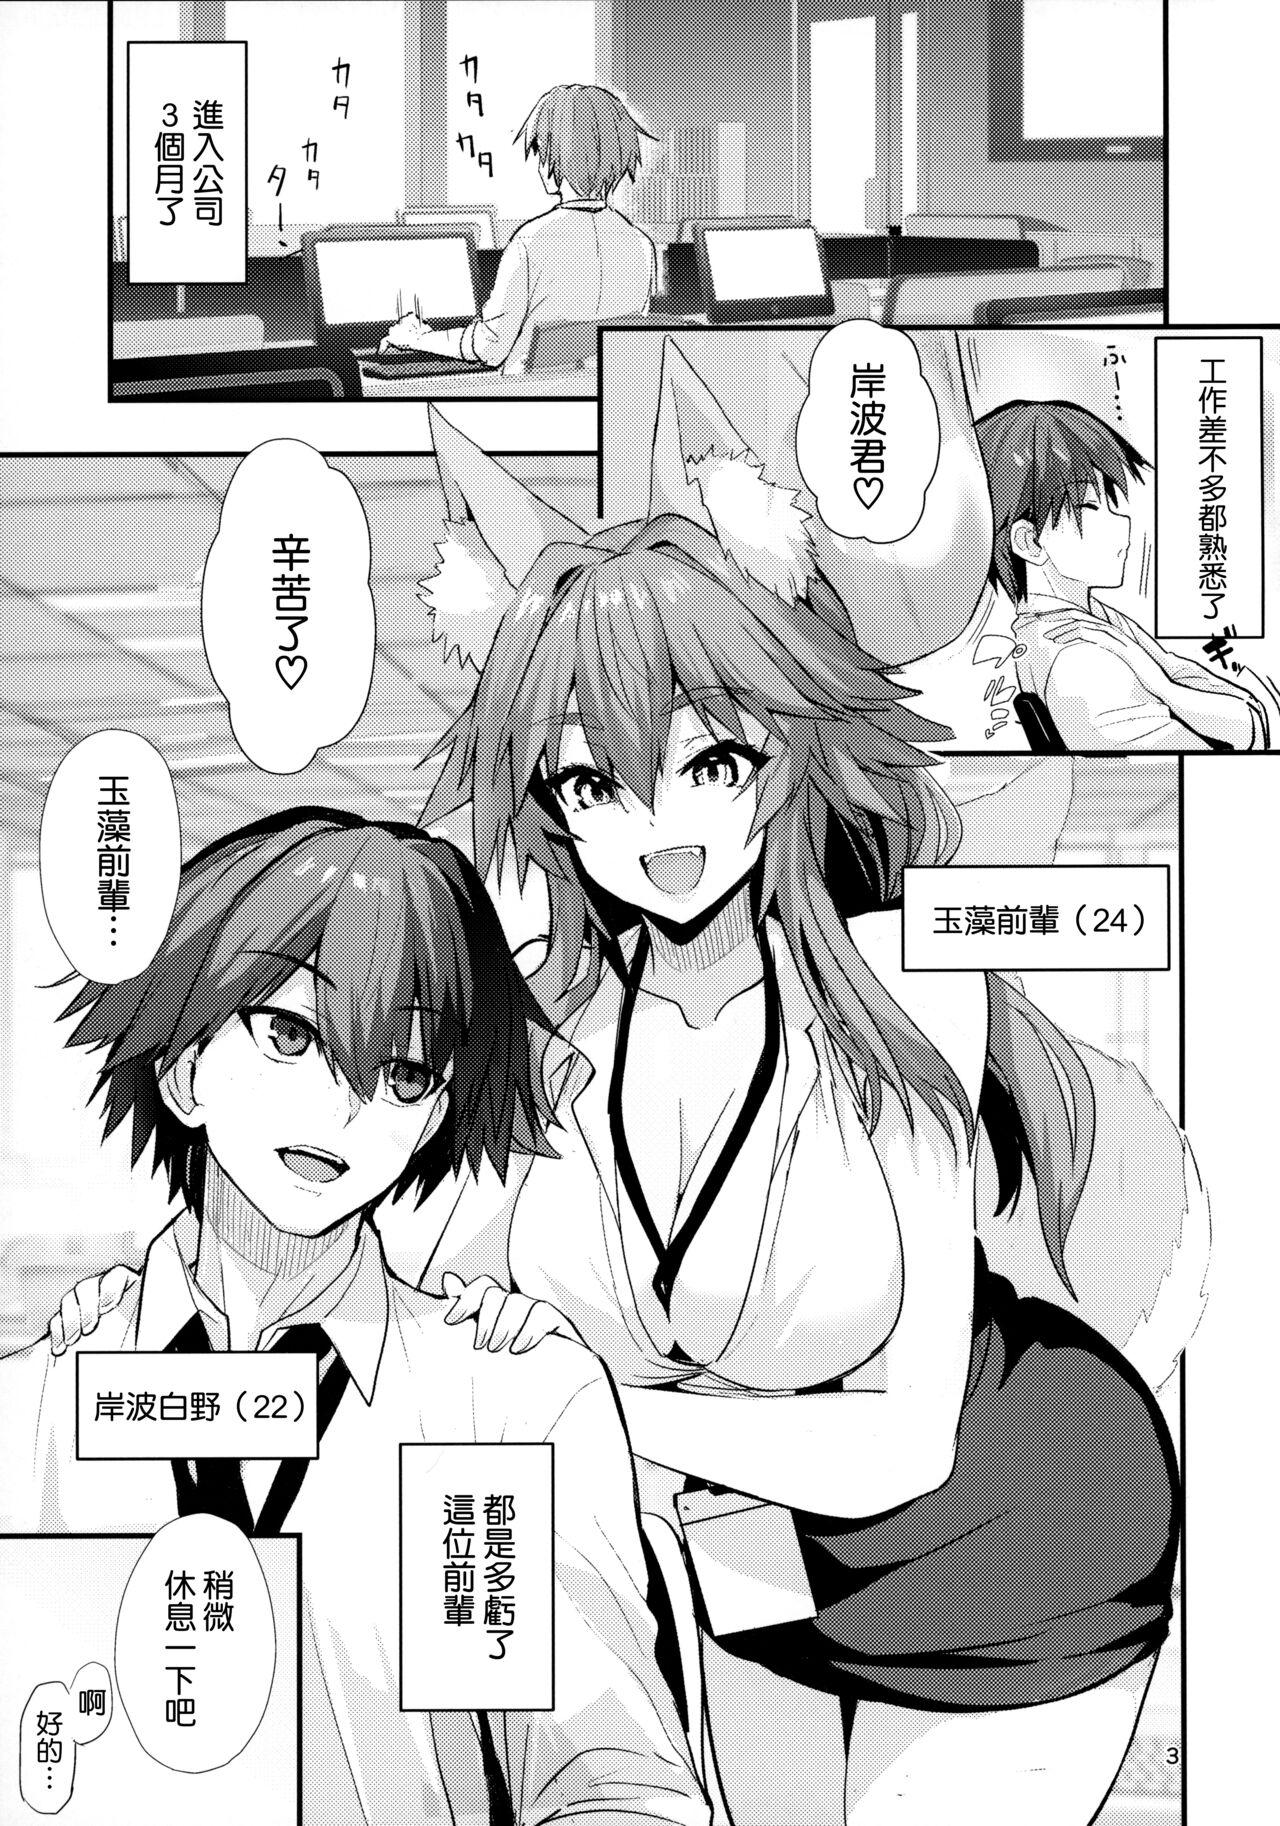 Blowjobs 先輩OLタマモさん - Fate extra Mature Woman - Page 3